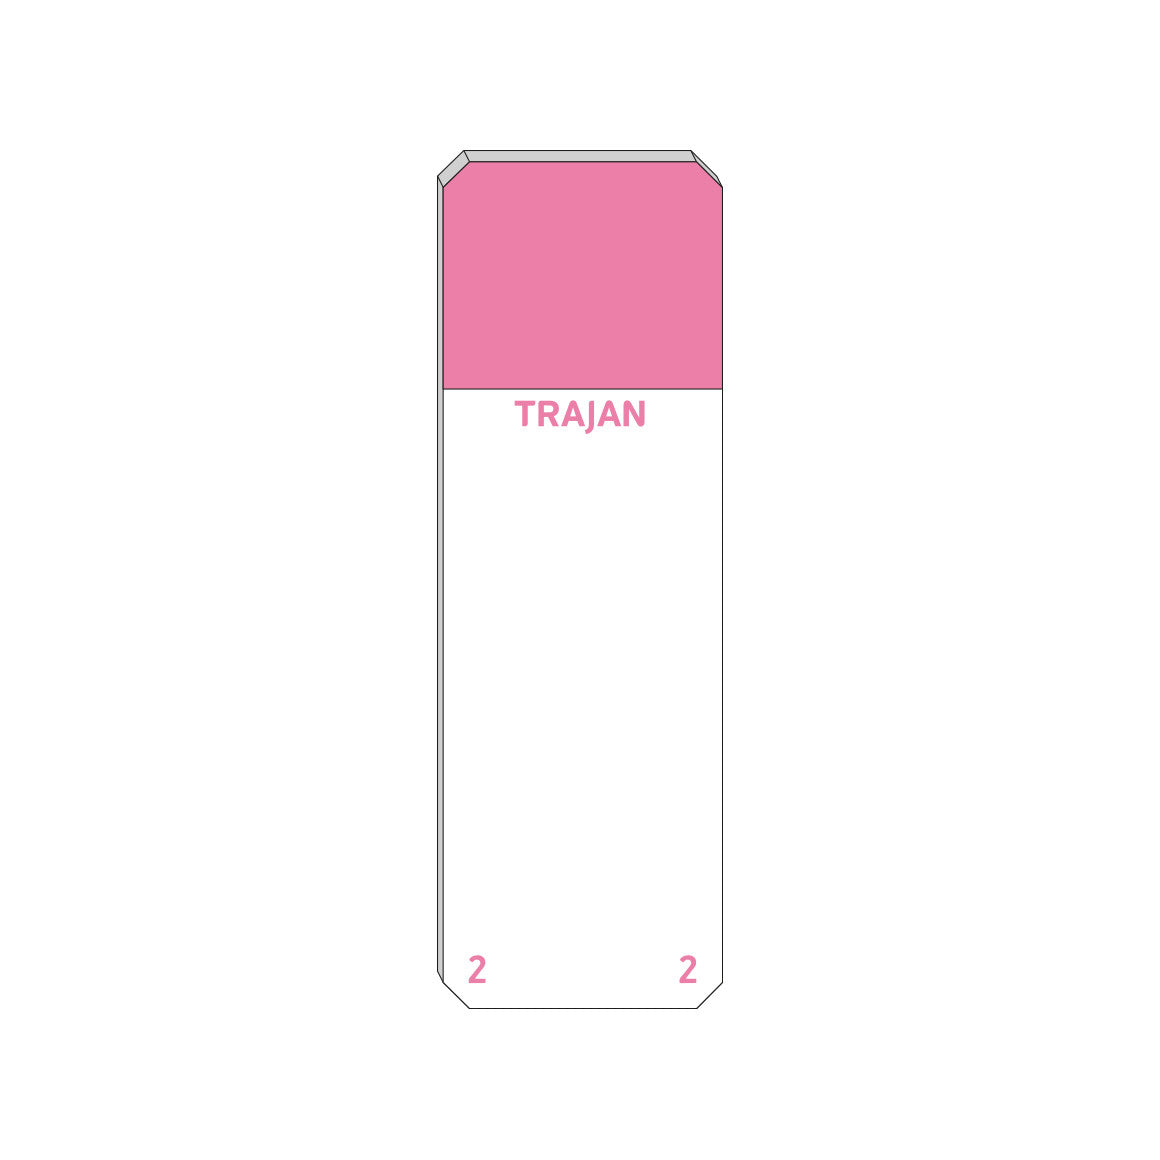 Trajan Scientific and Medical, Series 2 Adhesive Microscope Slides, Pink, Frost 20 mm, 75 mm x 25 mm